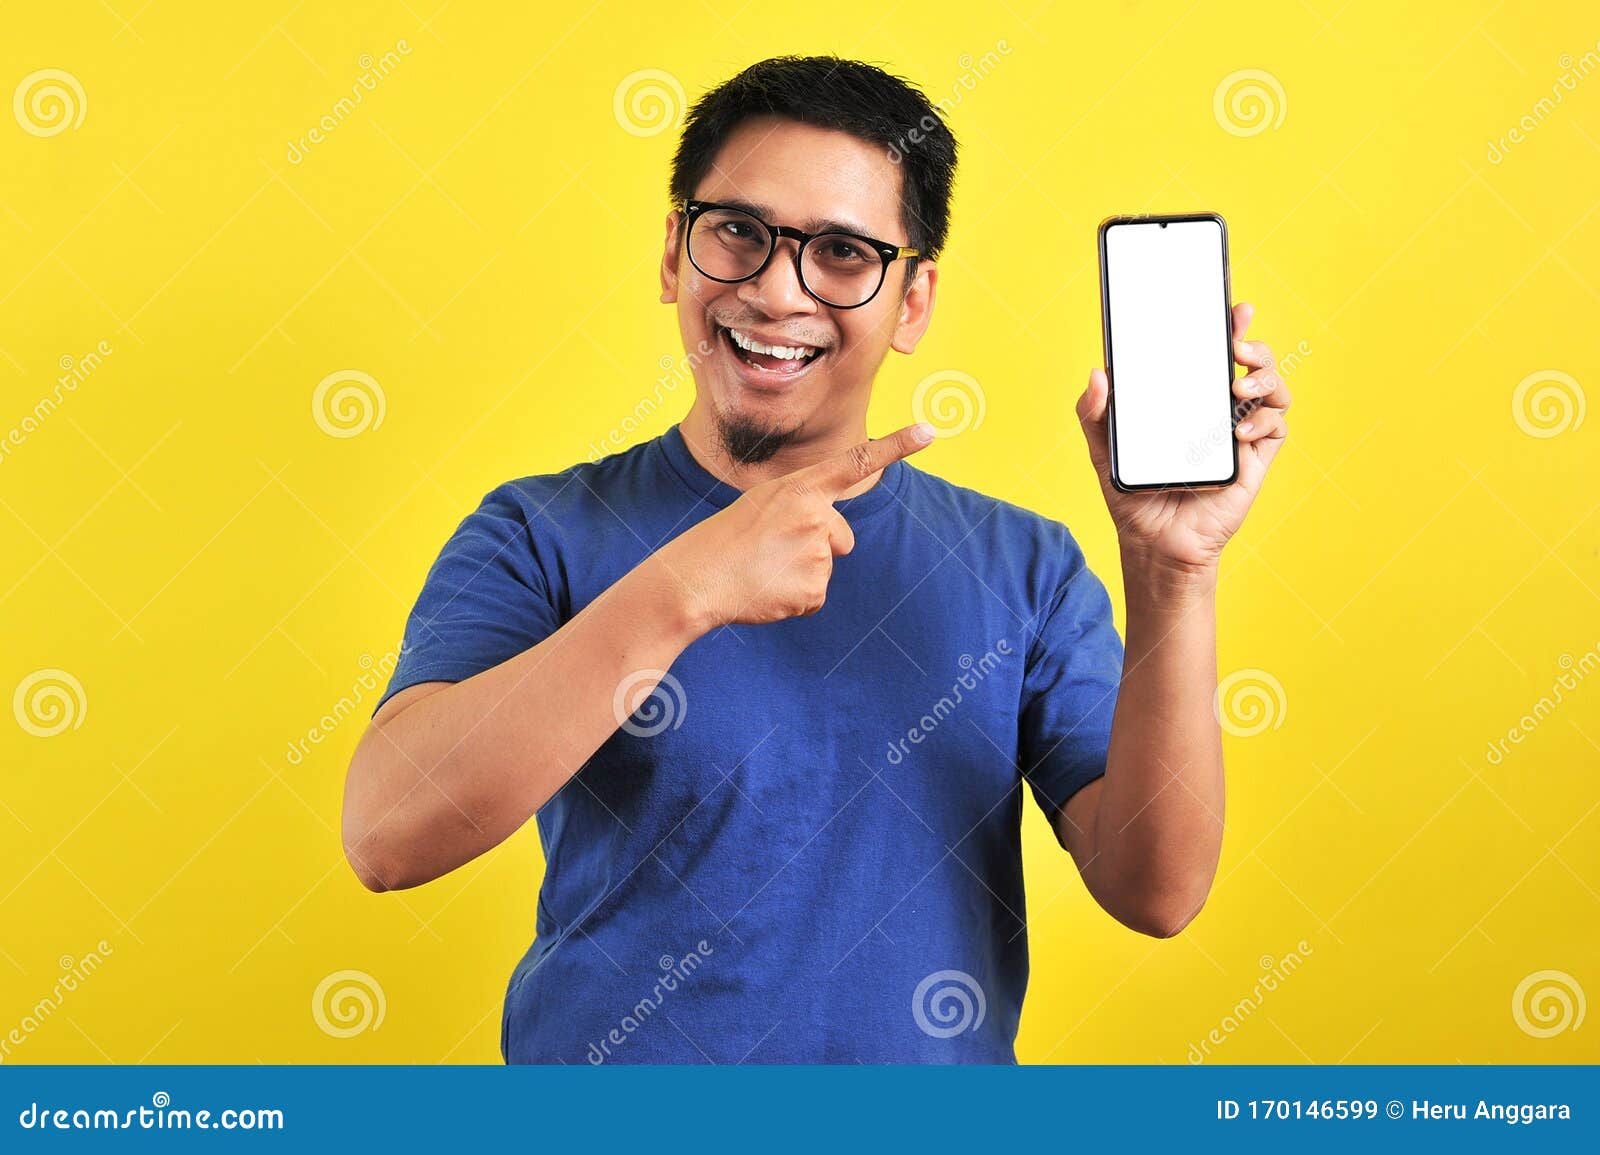 happy asian man showing a phone screen and pointing